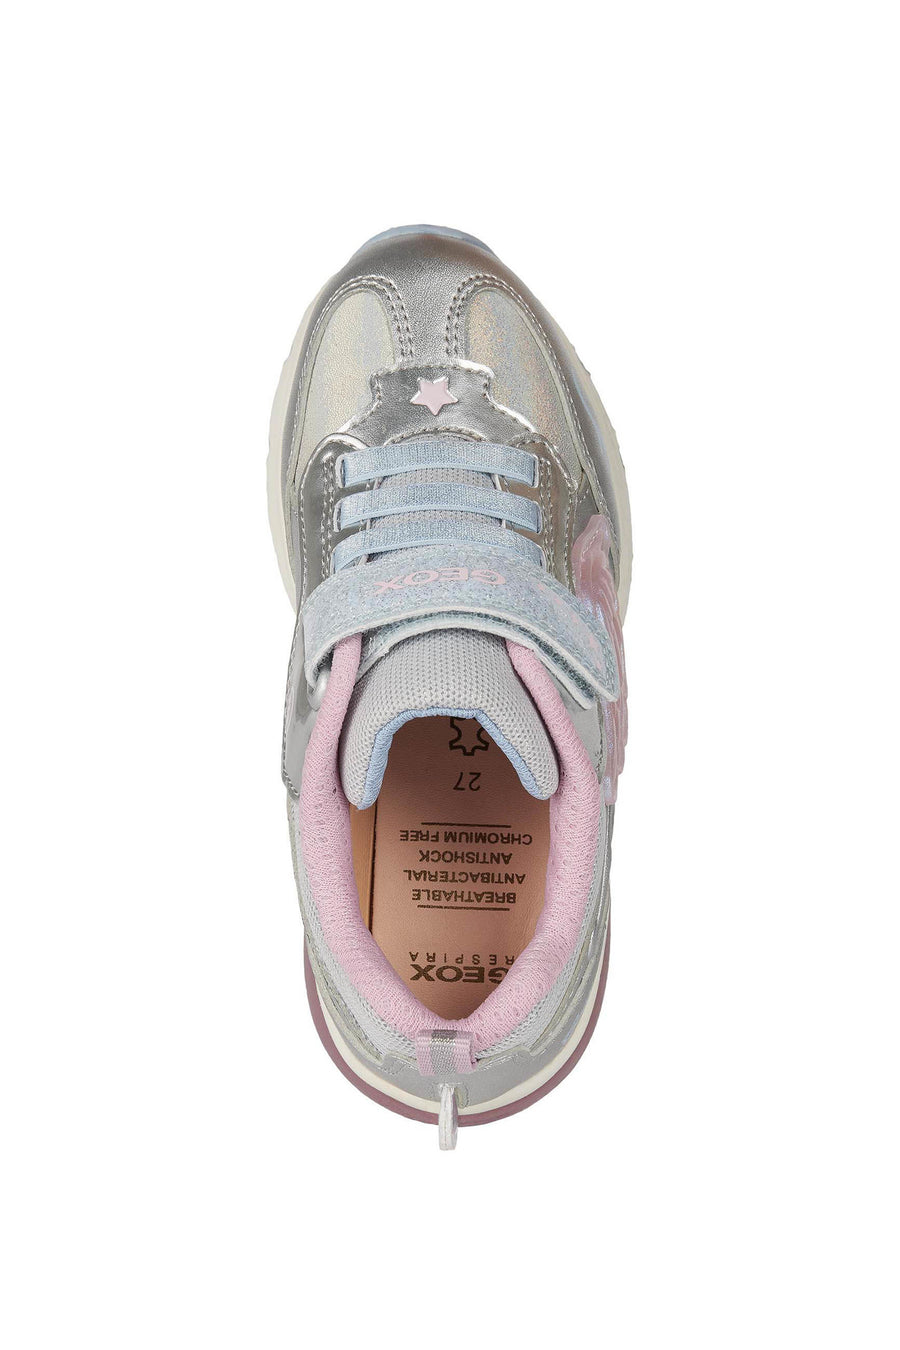 Geox Light Up Trainers |Spaceclub | Velcro| Silver & Pink